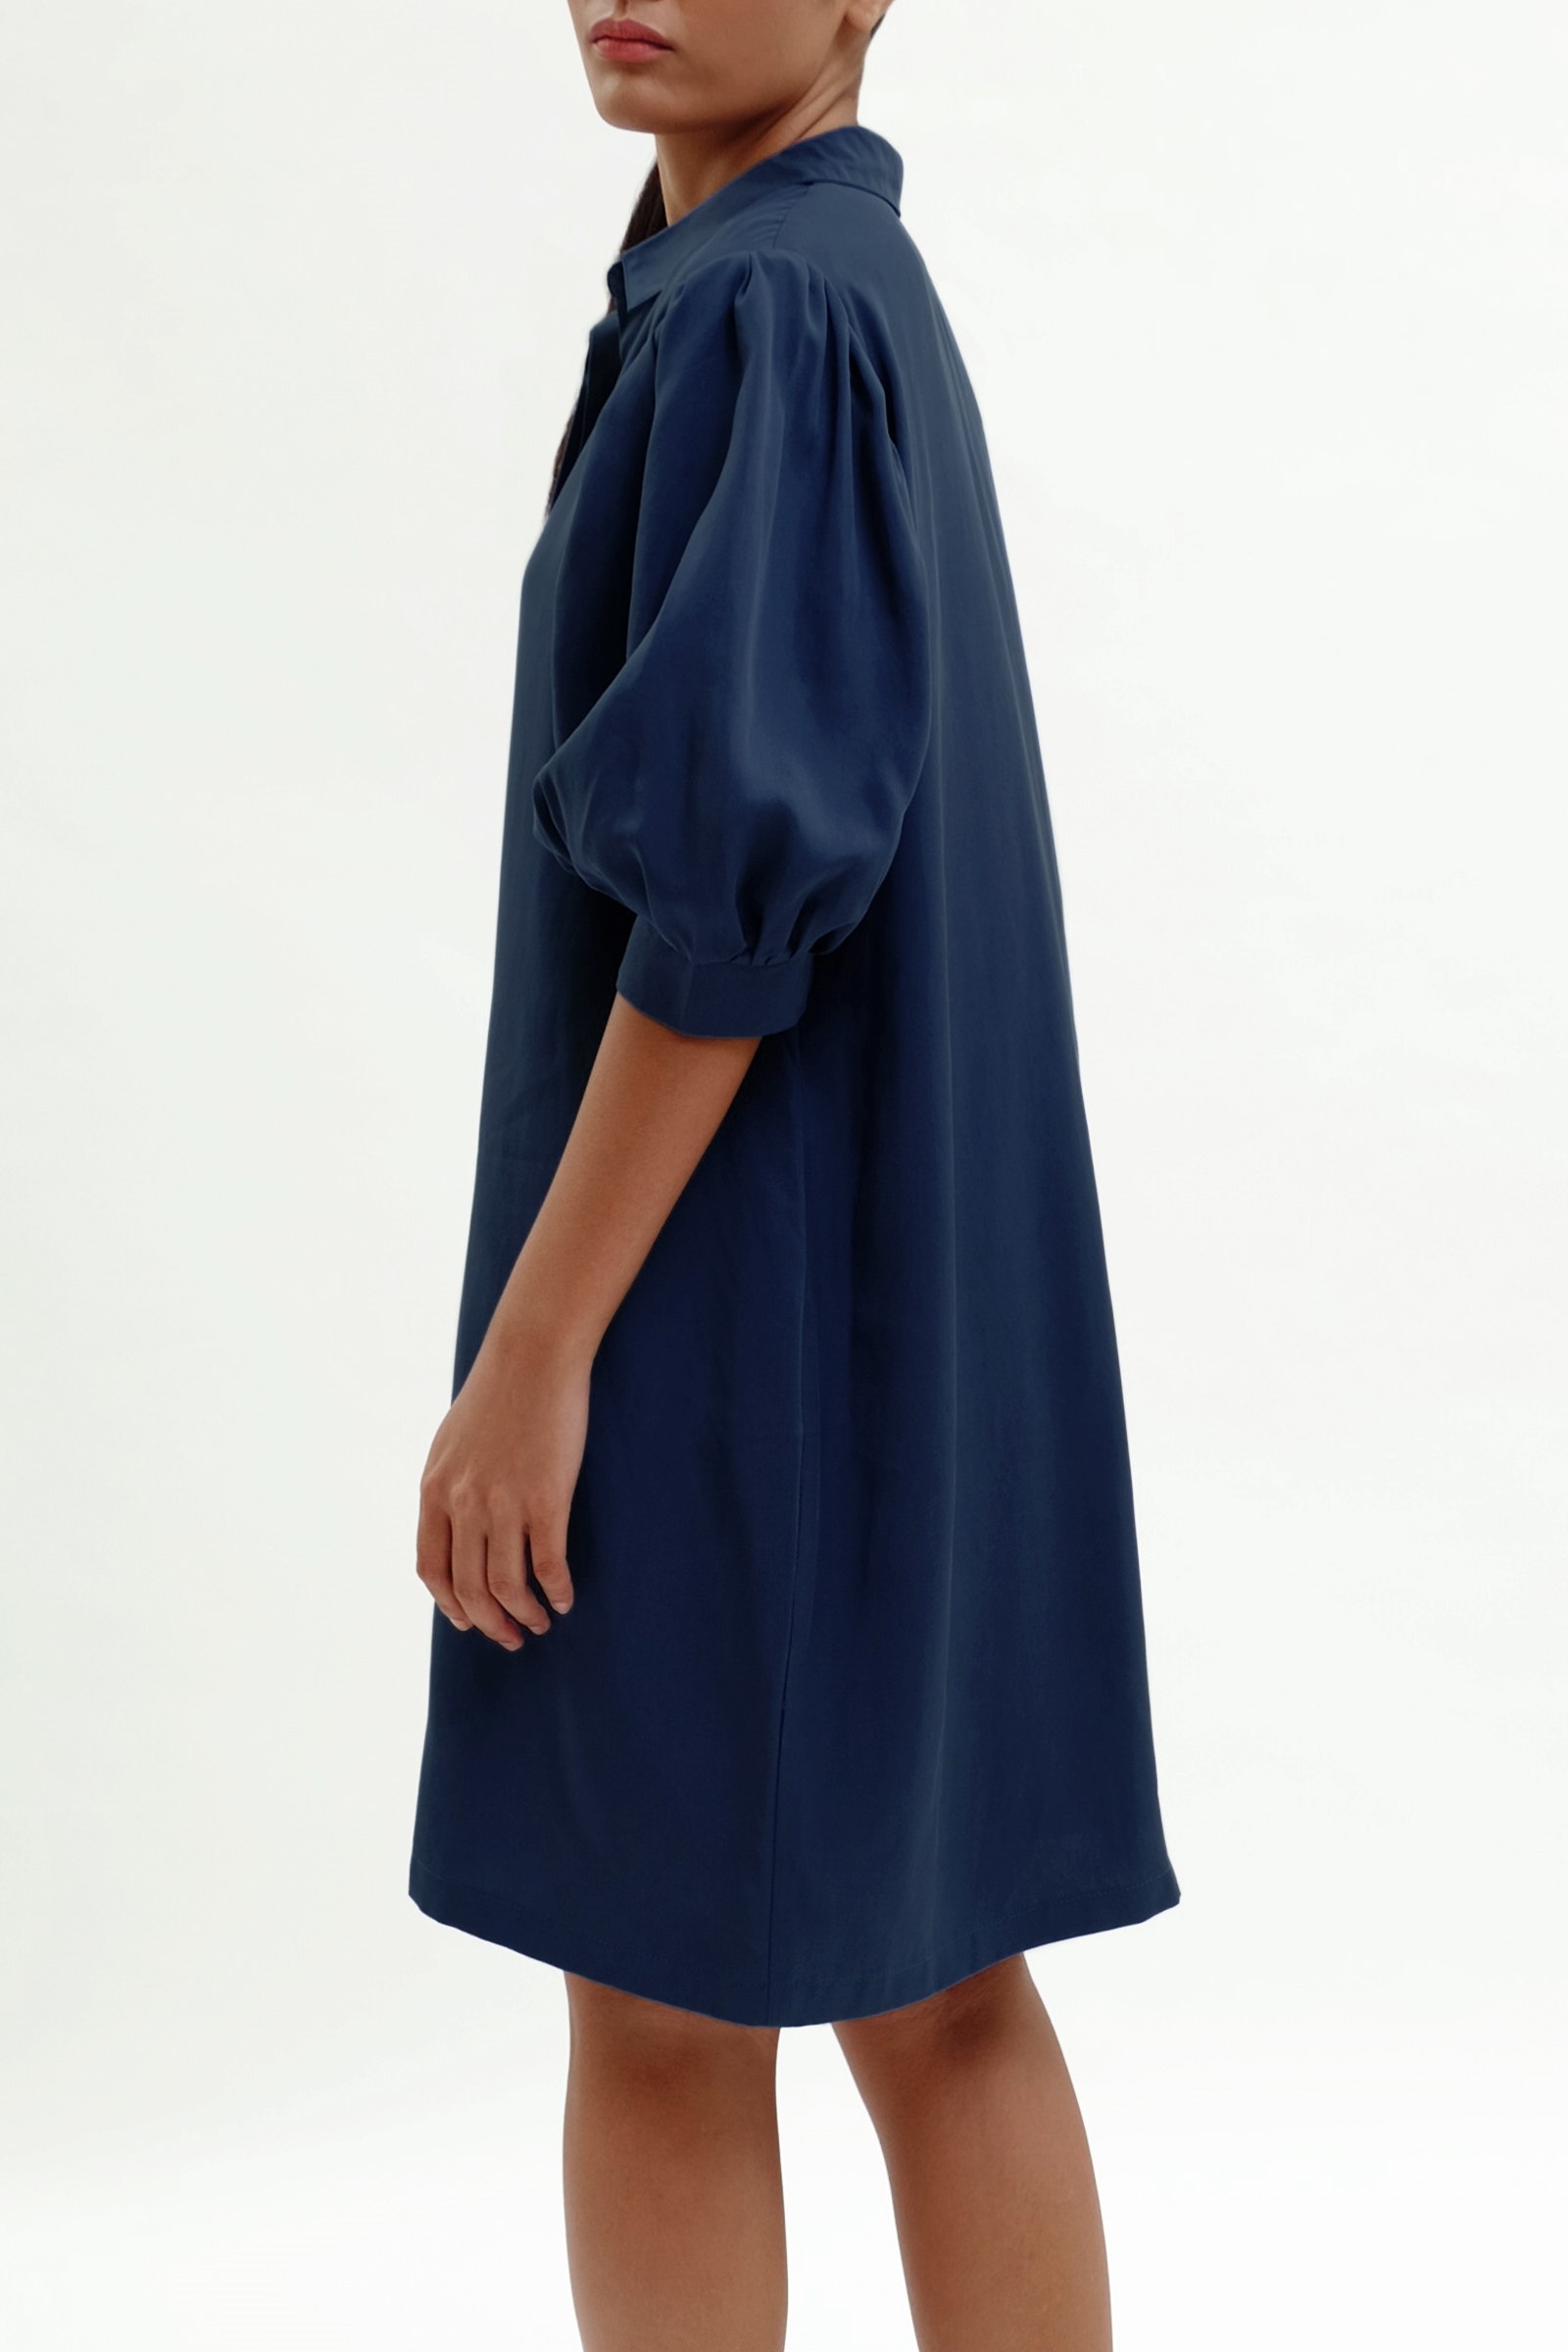 Picture of Aulia Dress Navy Classic  